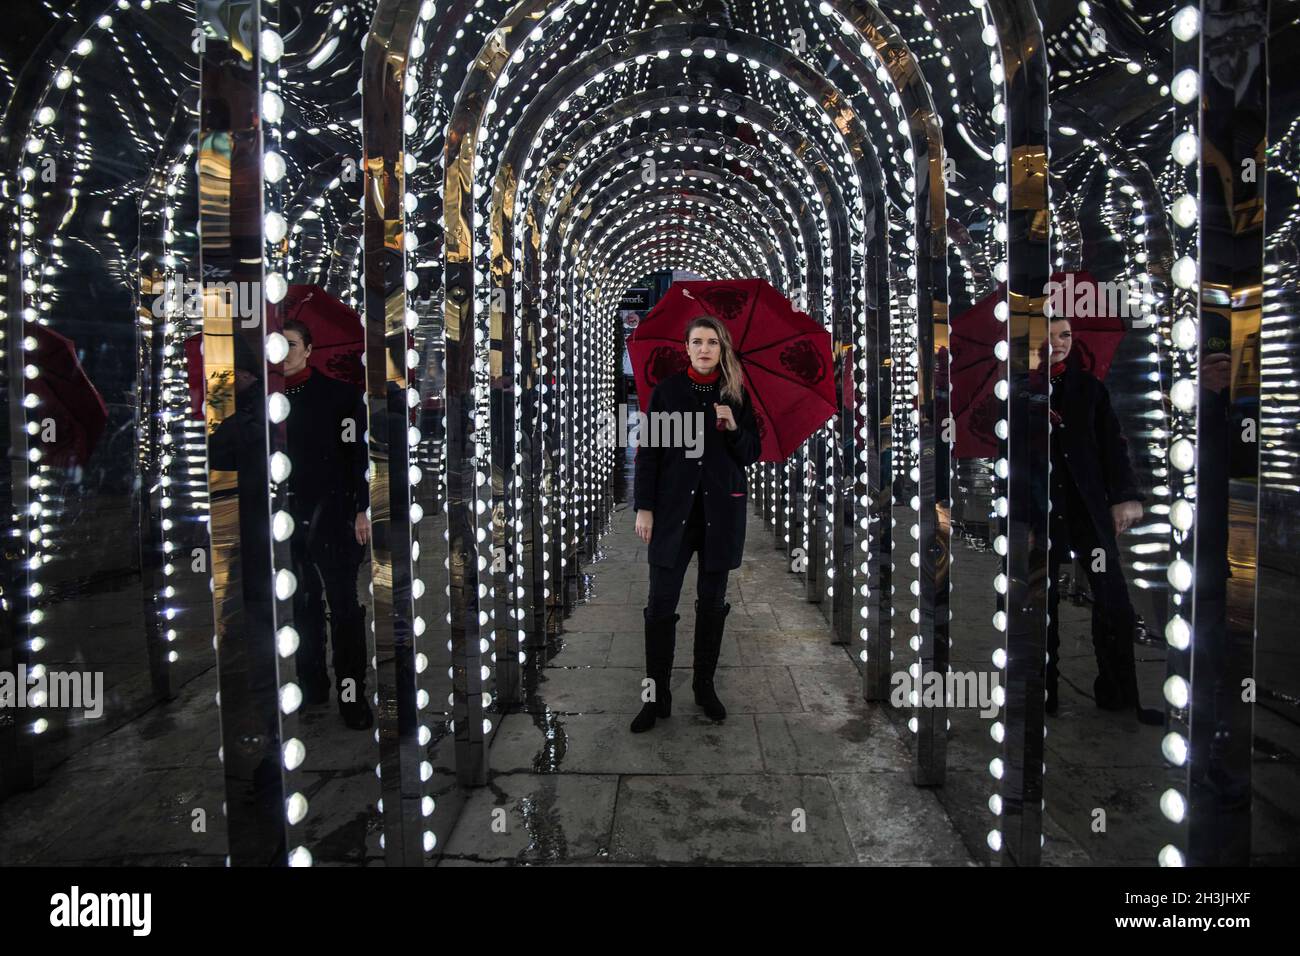 London, UK. 29th Oct, 2021. In the heart of the west end ahead of Christmas, this corridor of light illuminate the city.Paul Quezada-Neiman/Alamy Live News Credit: Paul Quezada-Neiman/Alamy Live News Stock Photo